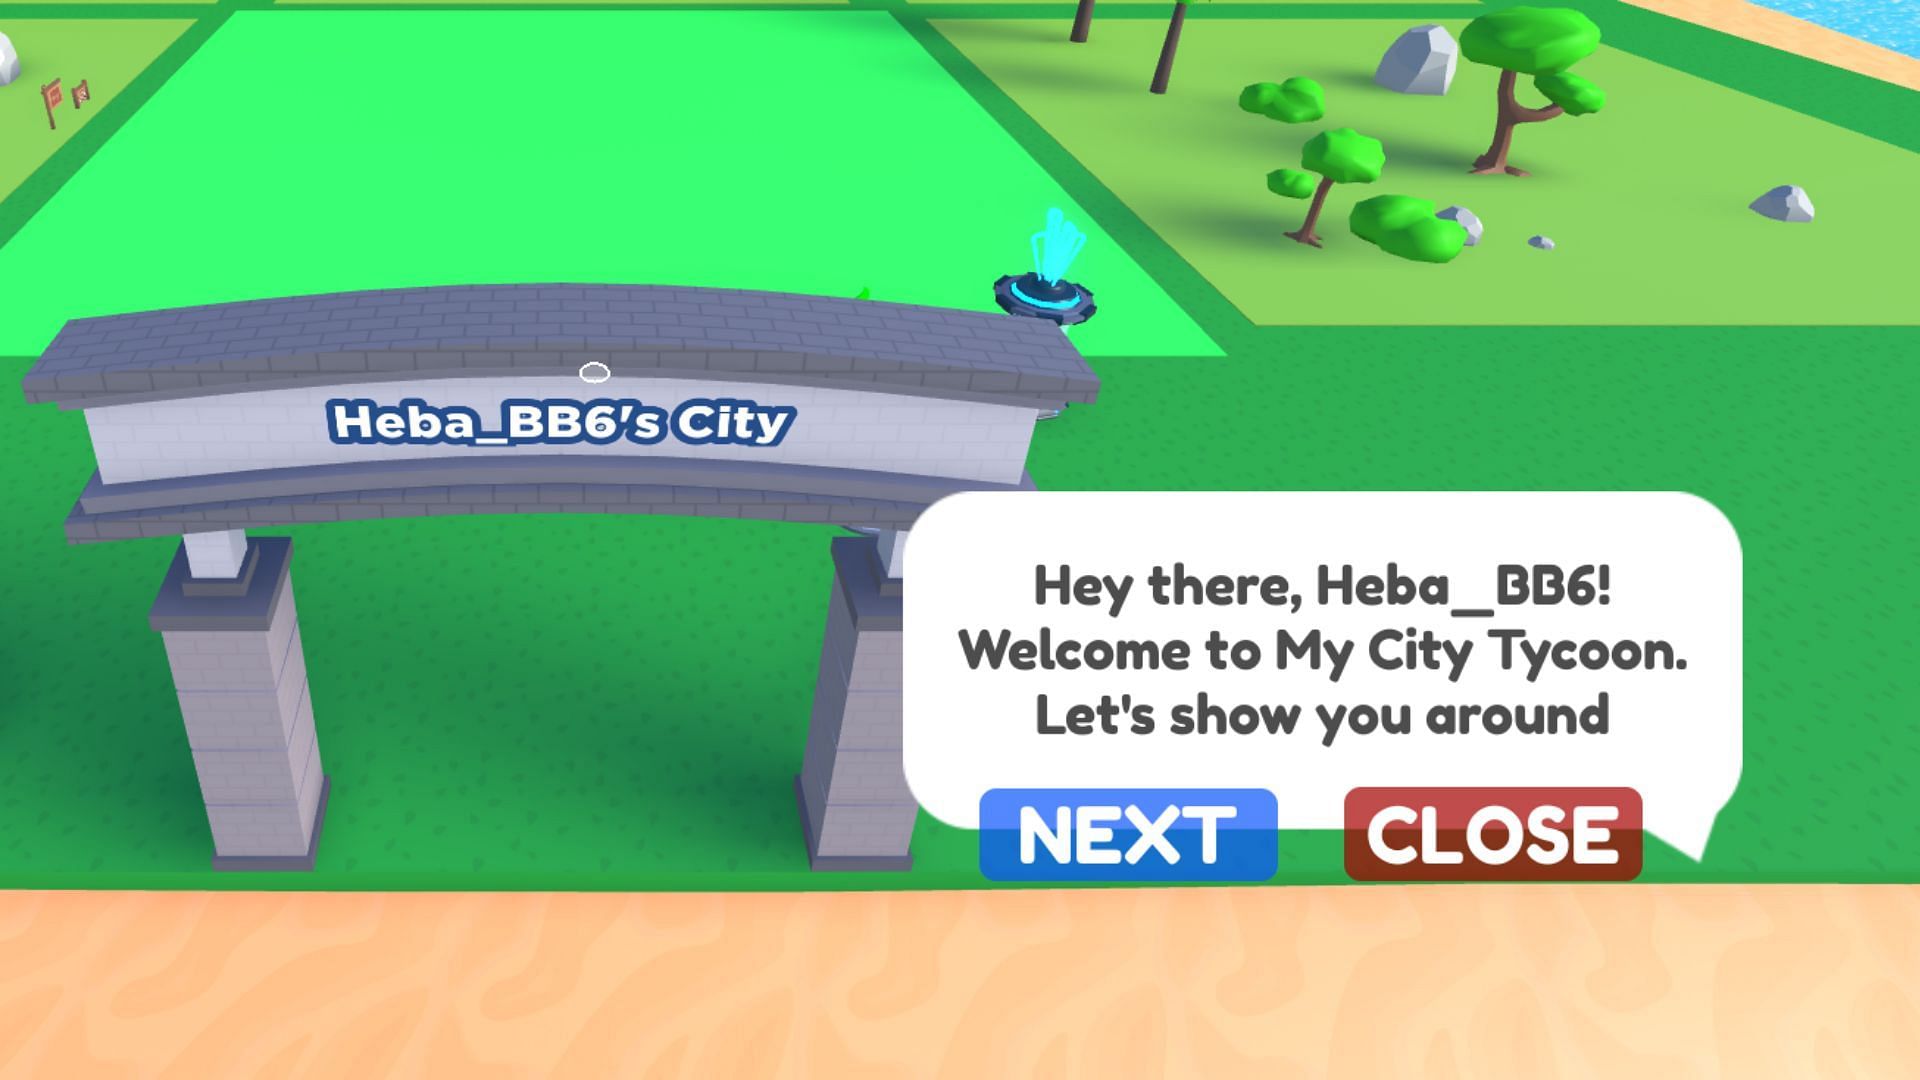 Build your own city in My City Tycoon (Image via Roblox)